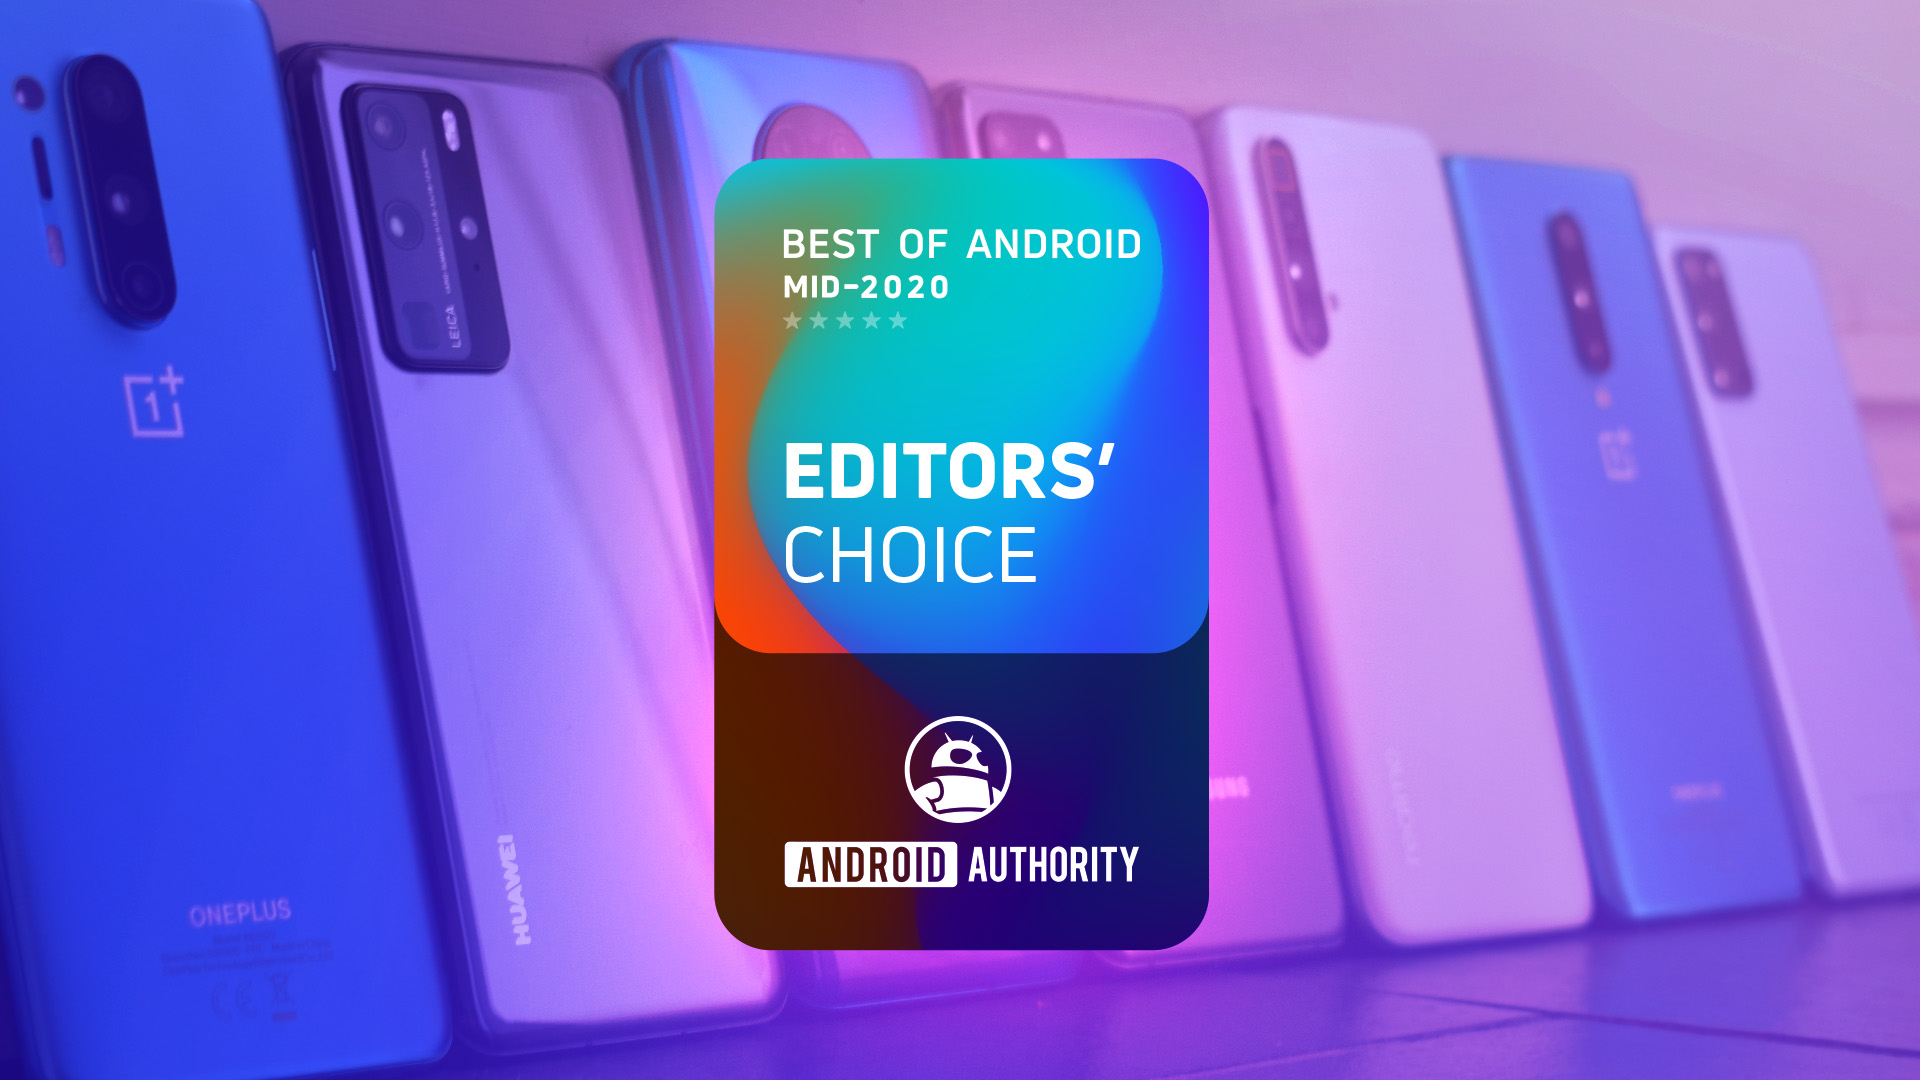 Android Authority Best of Android Mid-2020 Editors Choice winner